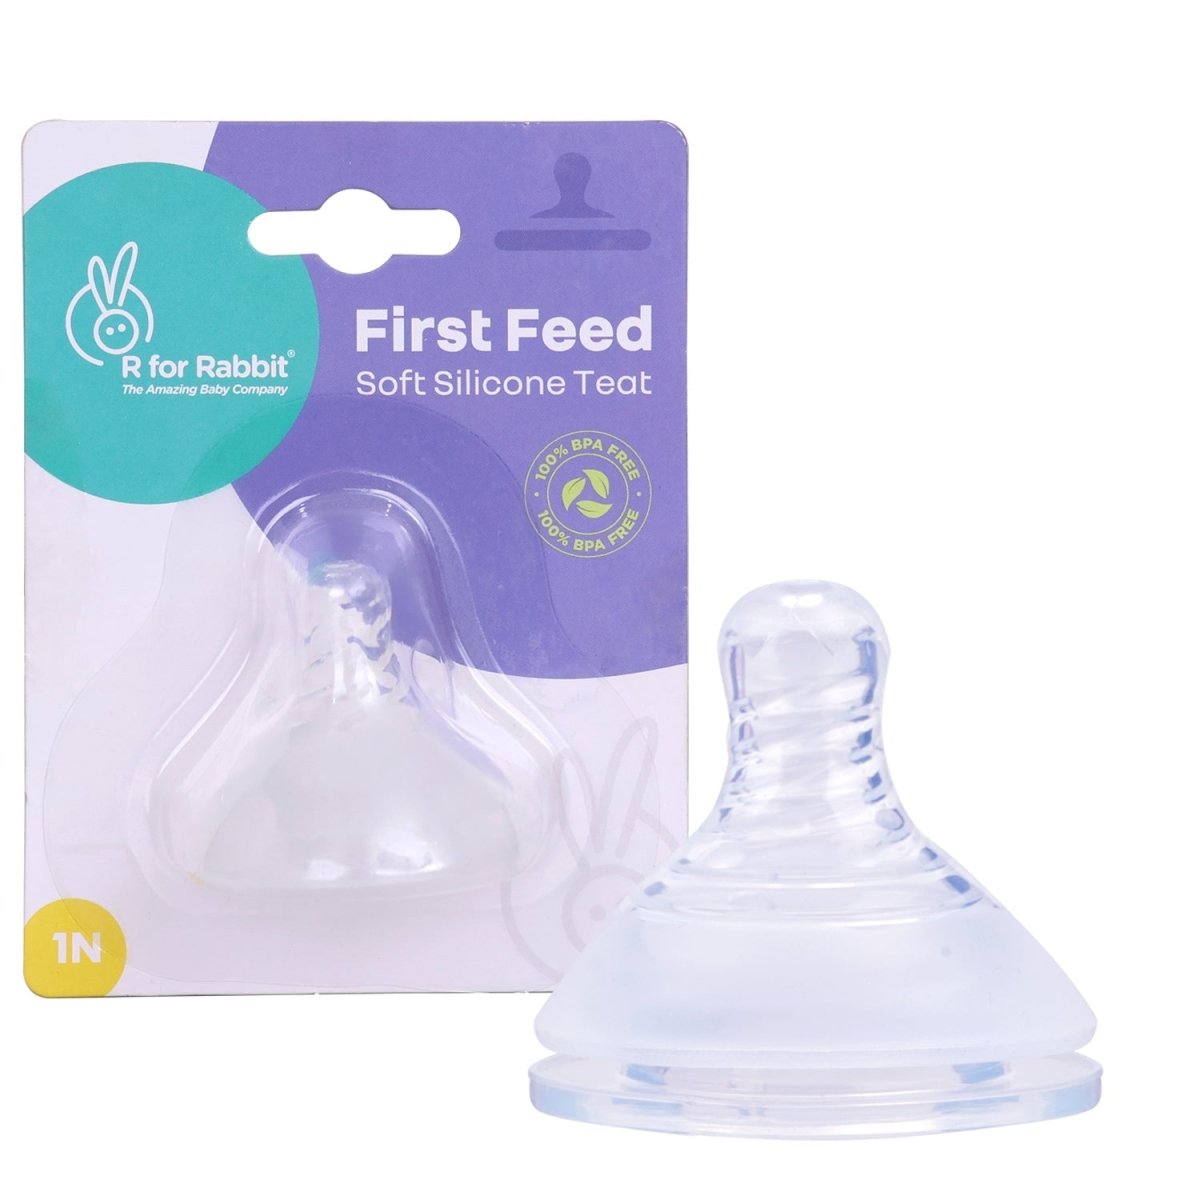 R for Rabbit First Feed Soft Silicon Teat for Glass/PP Bottle - FFSTGLPP2